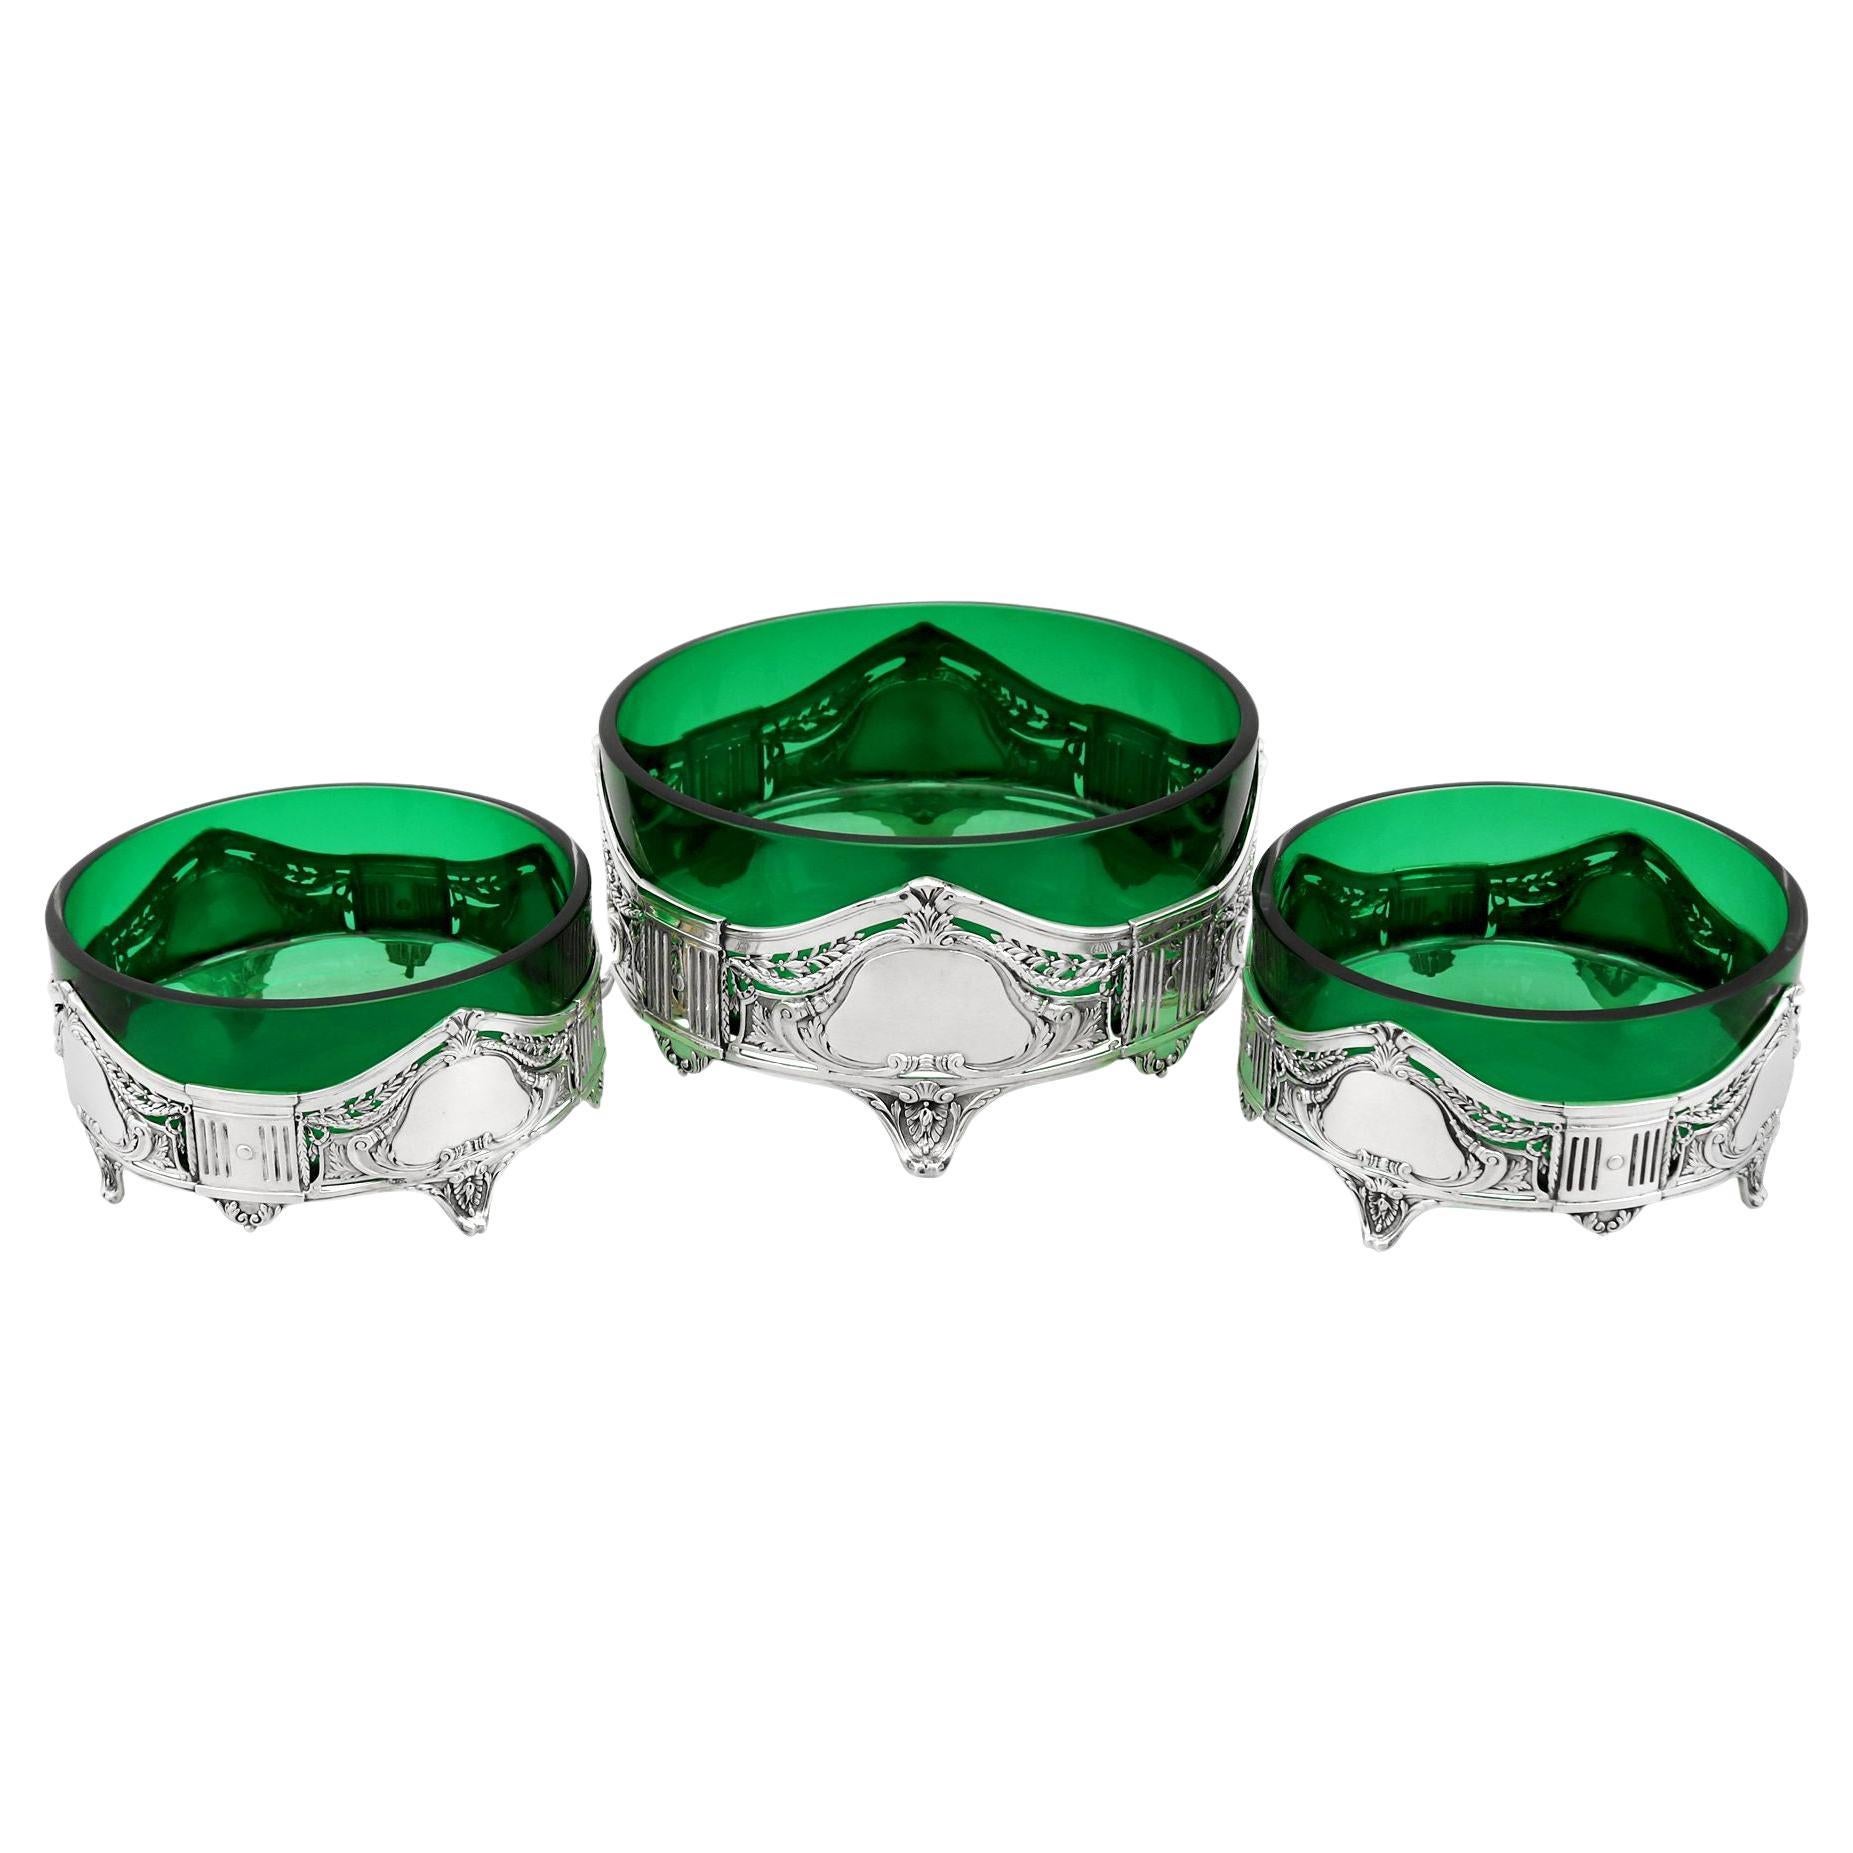 Antique Silver and Green Glass Centrepiece Dishes Art Nouveau Style For Sale